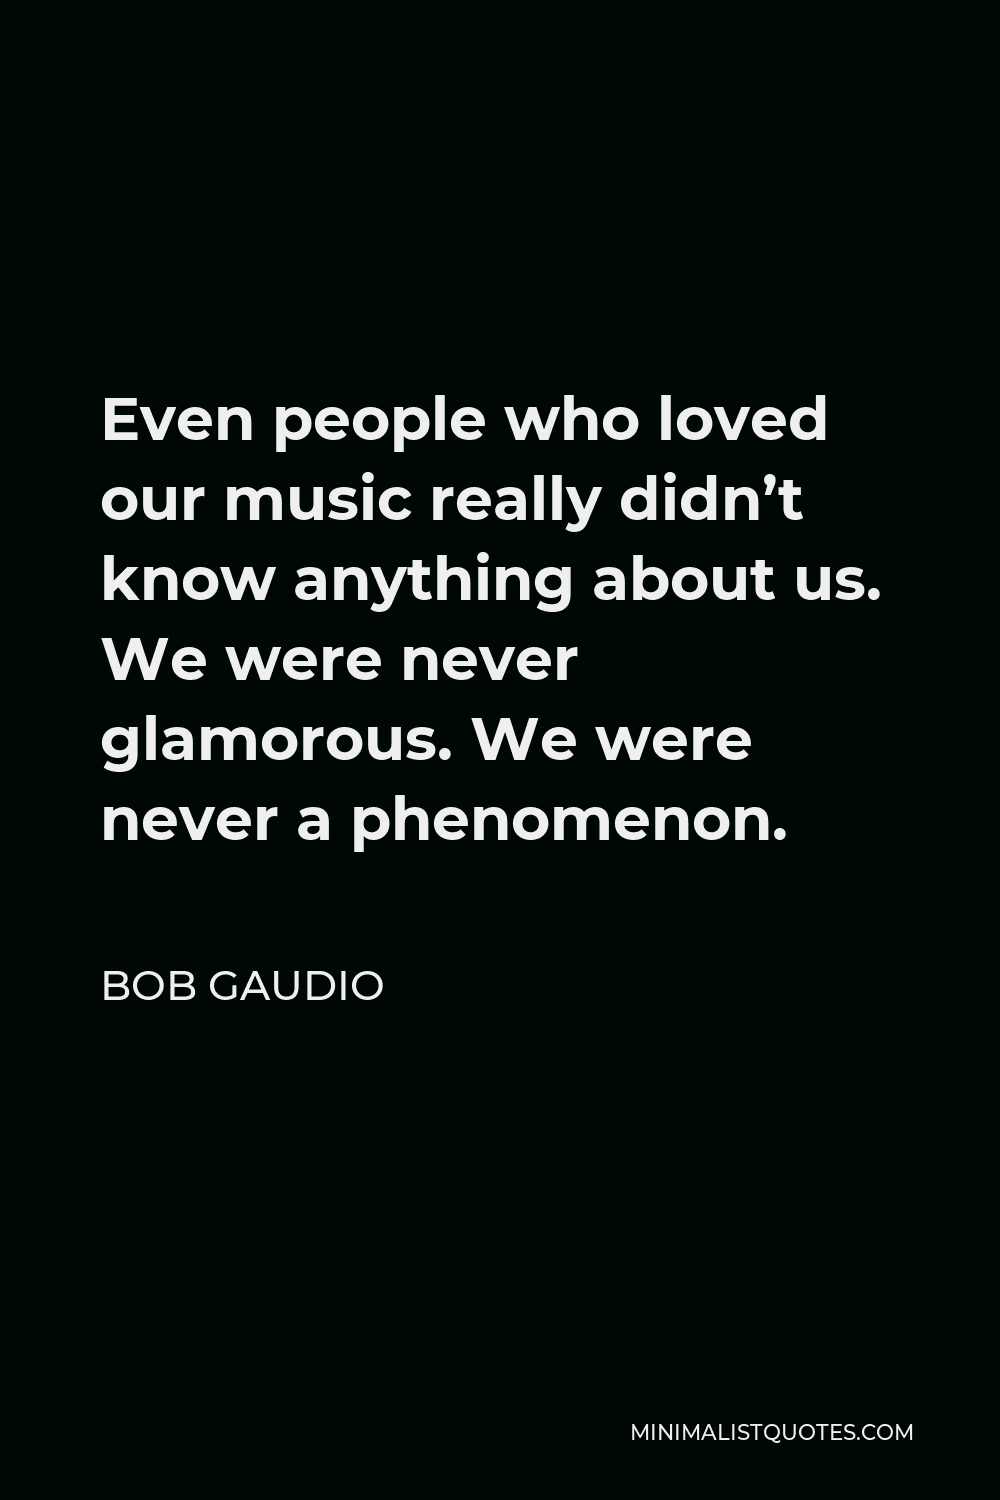 Bob Gaudio Quote - Even people who loved our music really didn’t know anything about us. We were never glamorous. We were never a phenomenon.